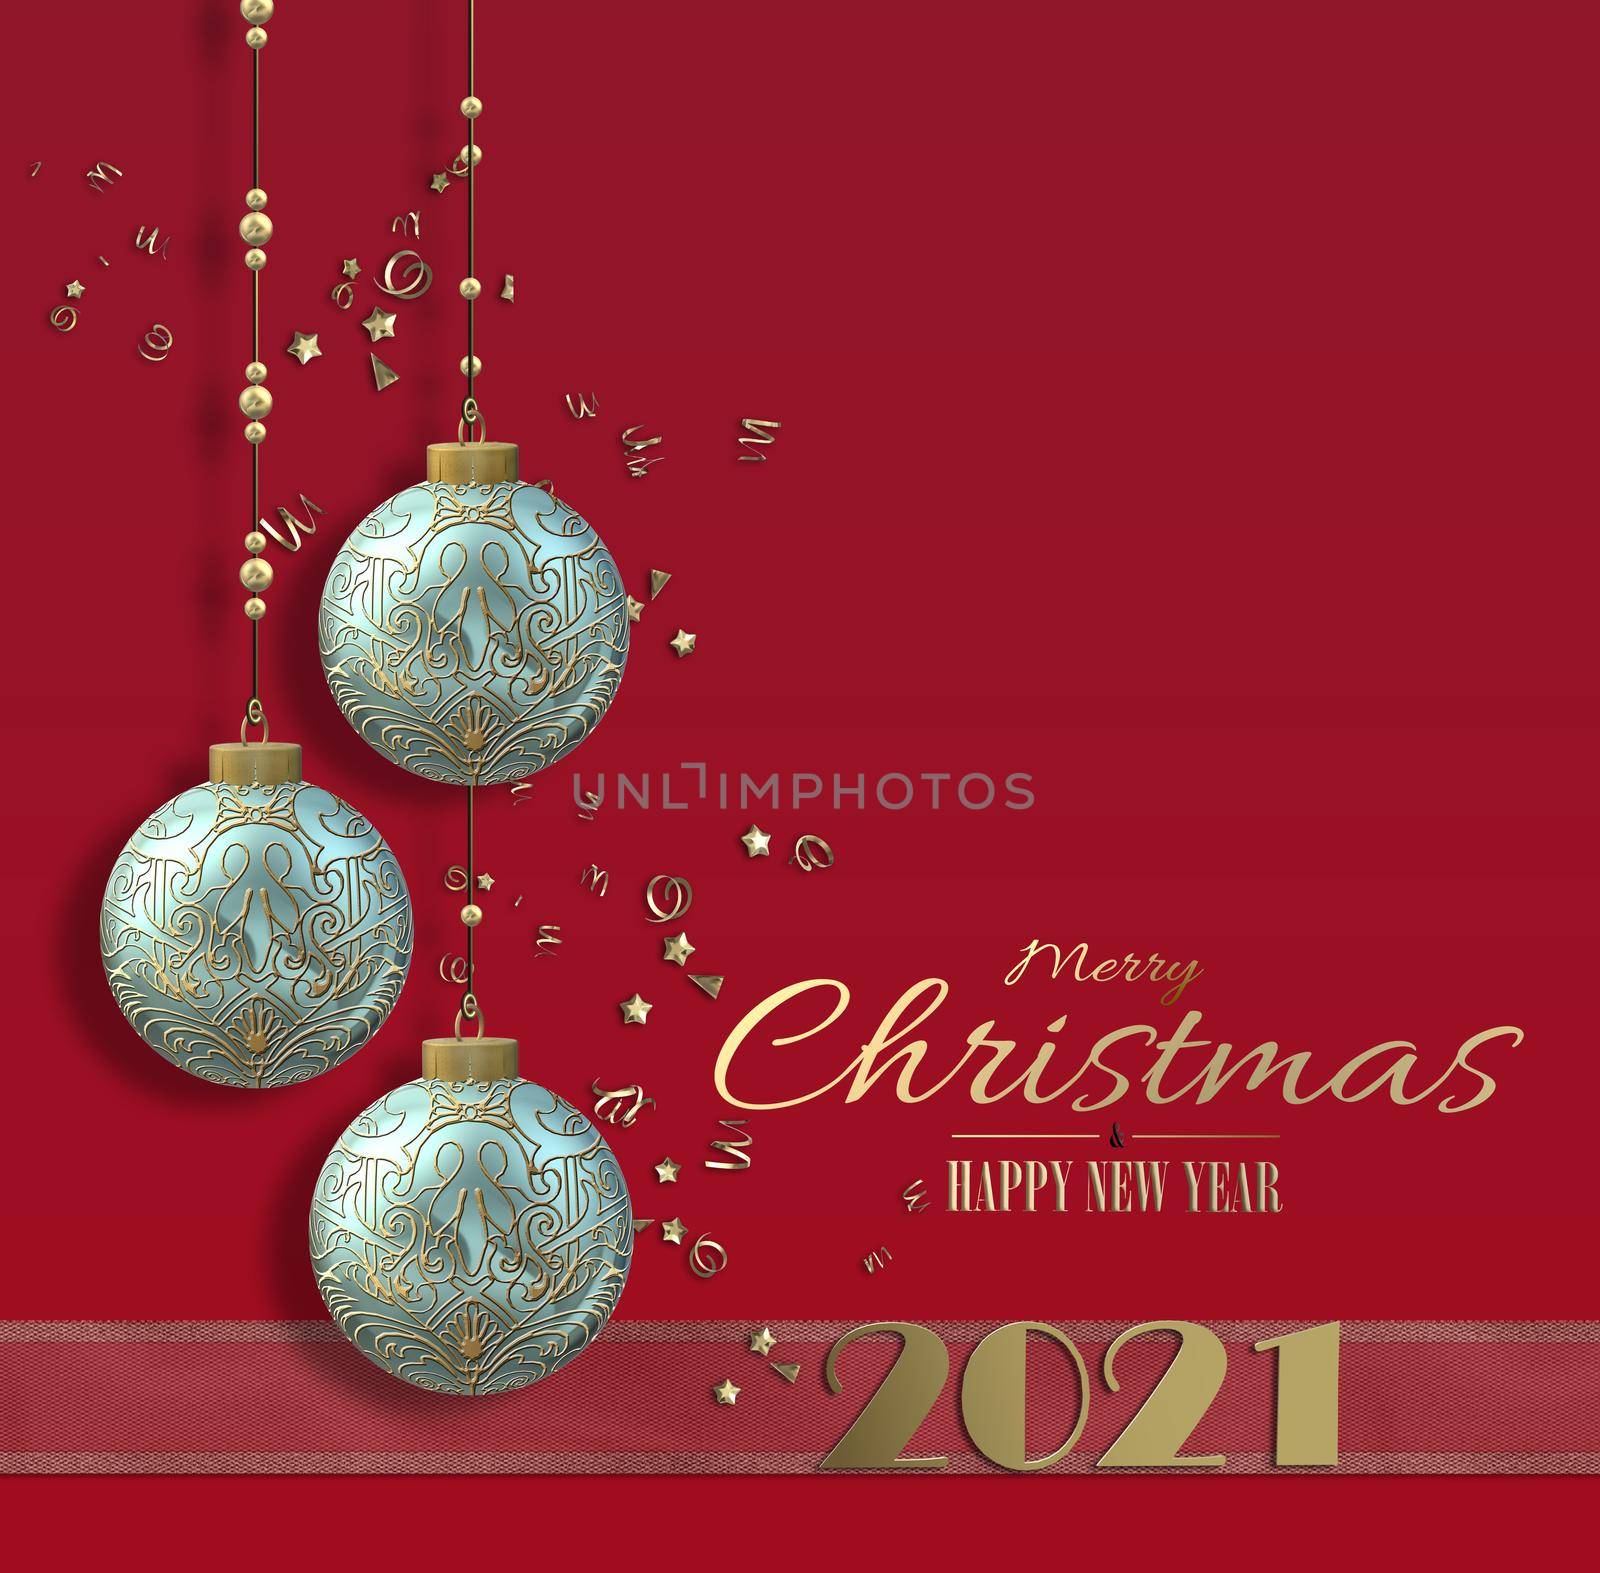 New Year 2021 holiday Christmas card with hanging Xmas balls baubles, gold digit 2021 on red background. Christmas and New Year wishes text. 3D render